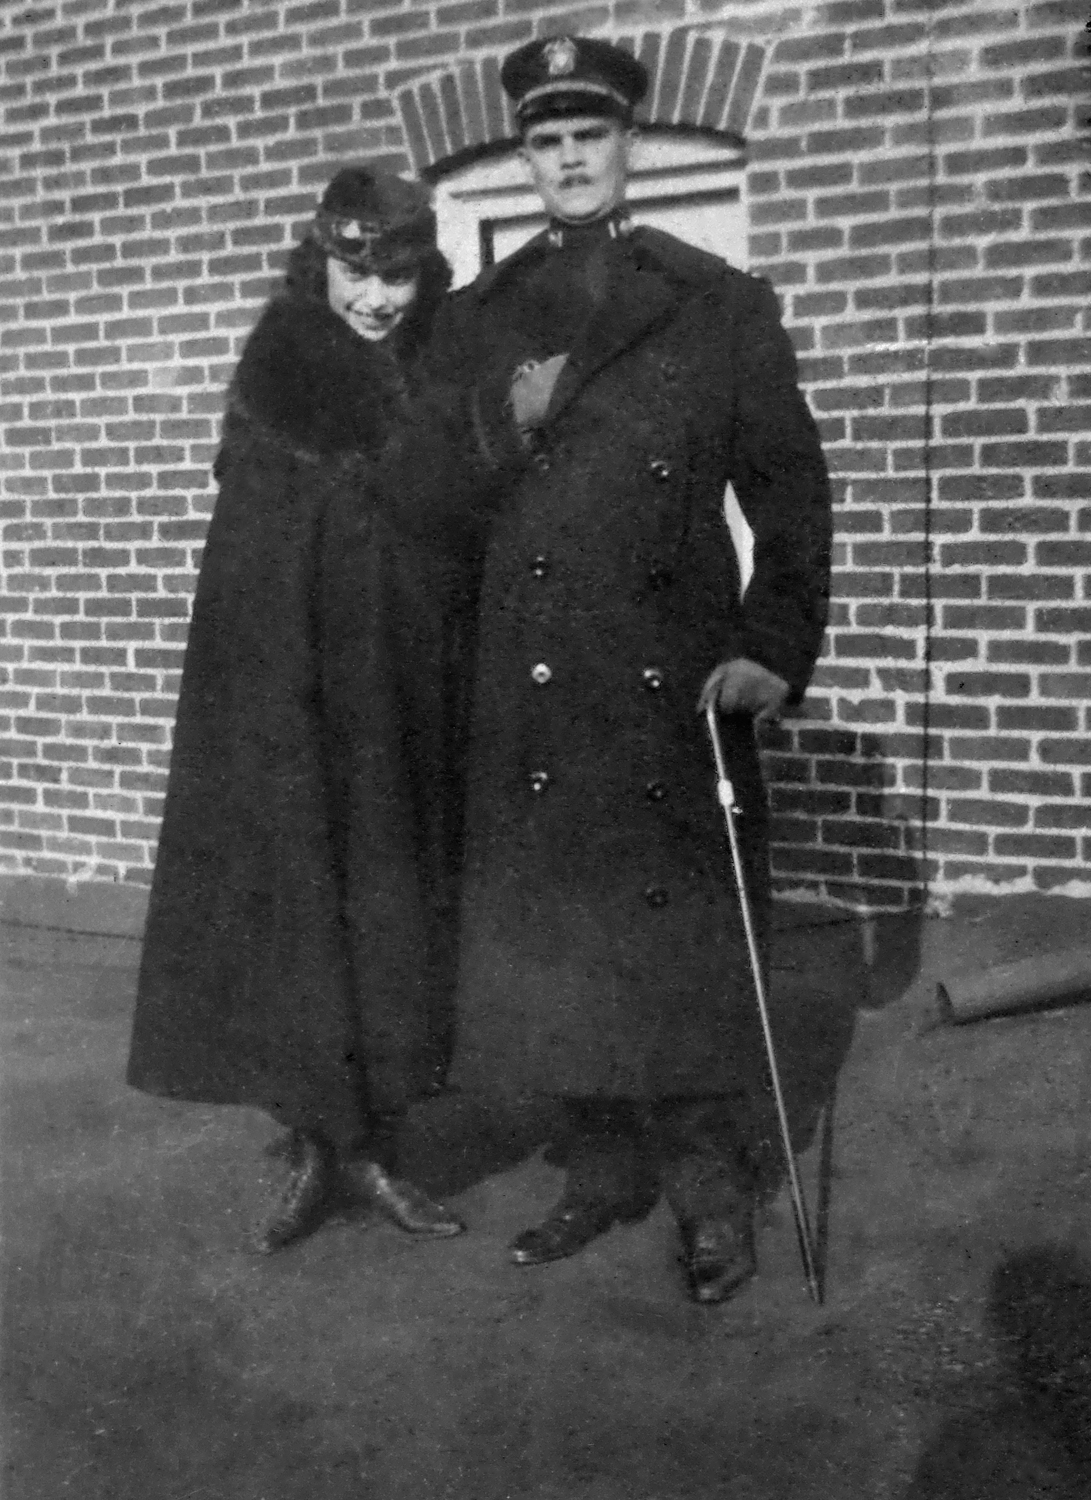 Kathryn and Harry, April 1919